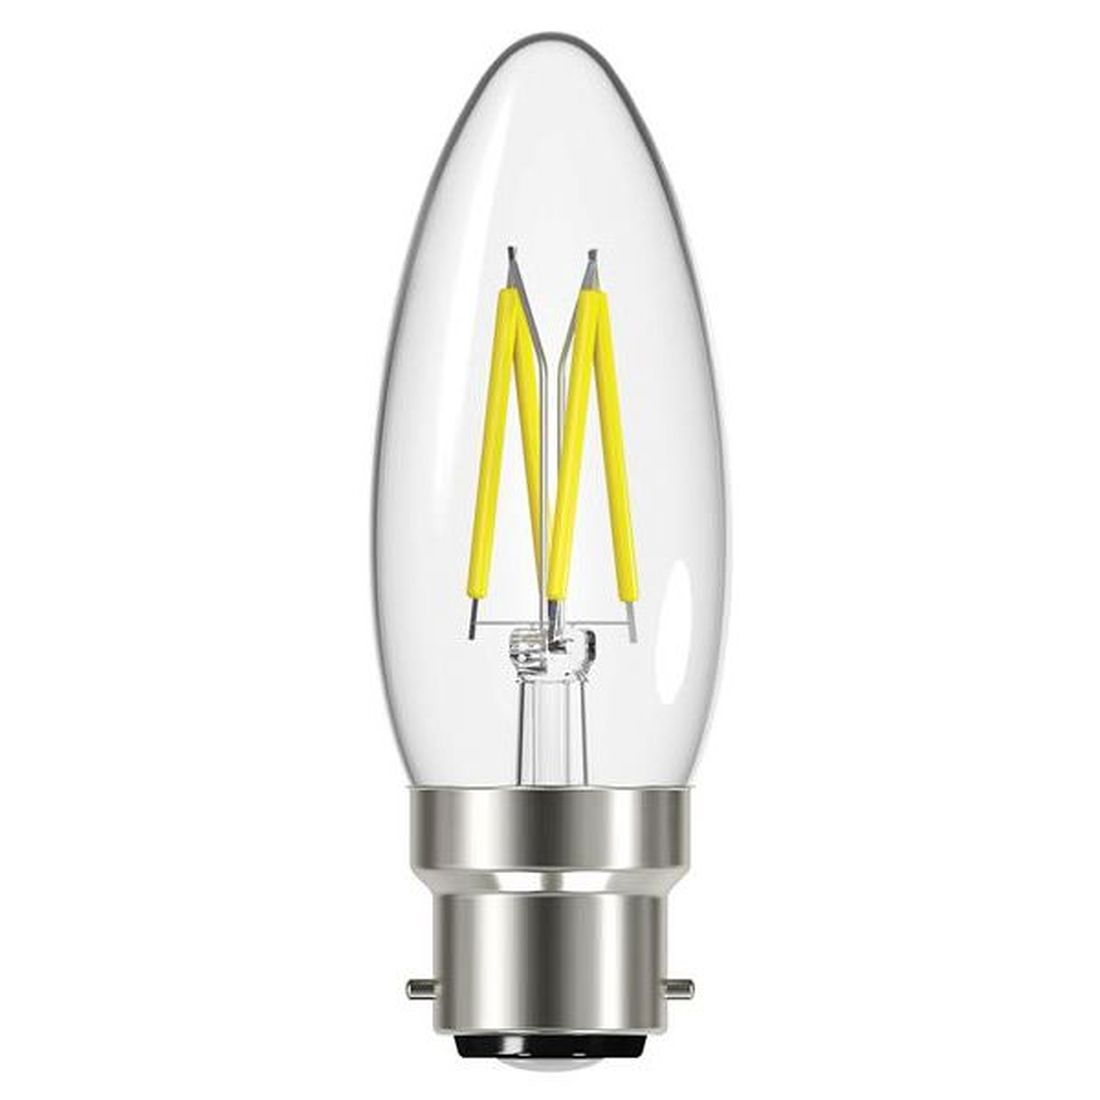 Energizer LED BC (B22) Candle Filament Dimmable Bulb, Warm White 470 lm 4W                